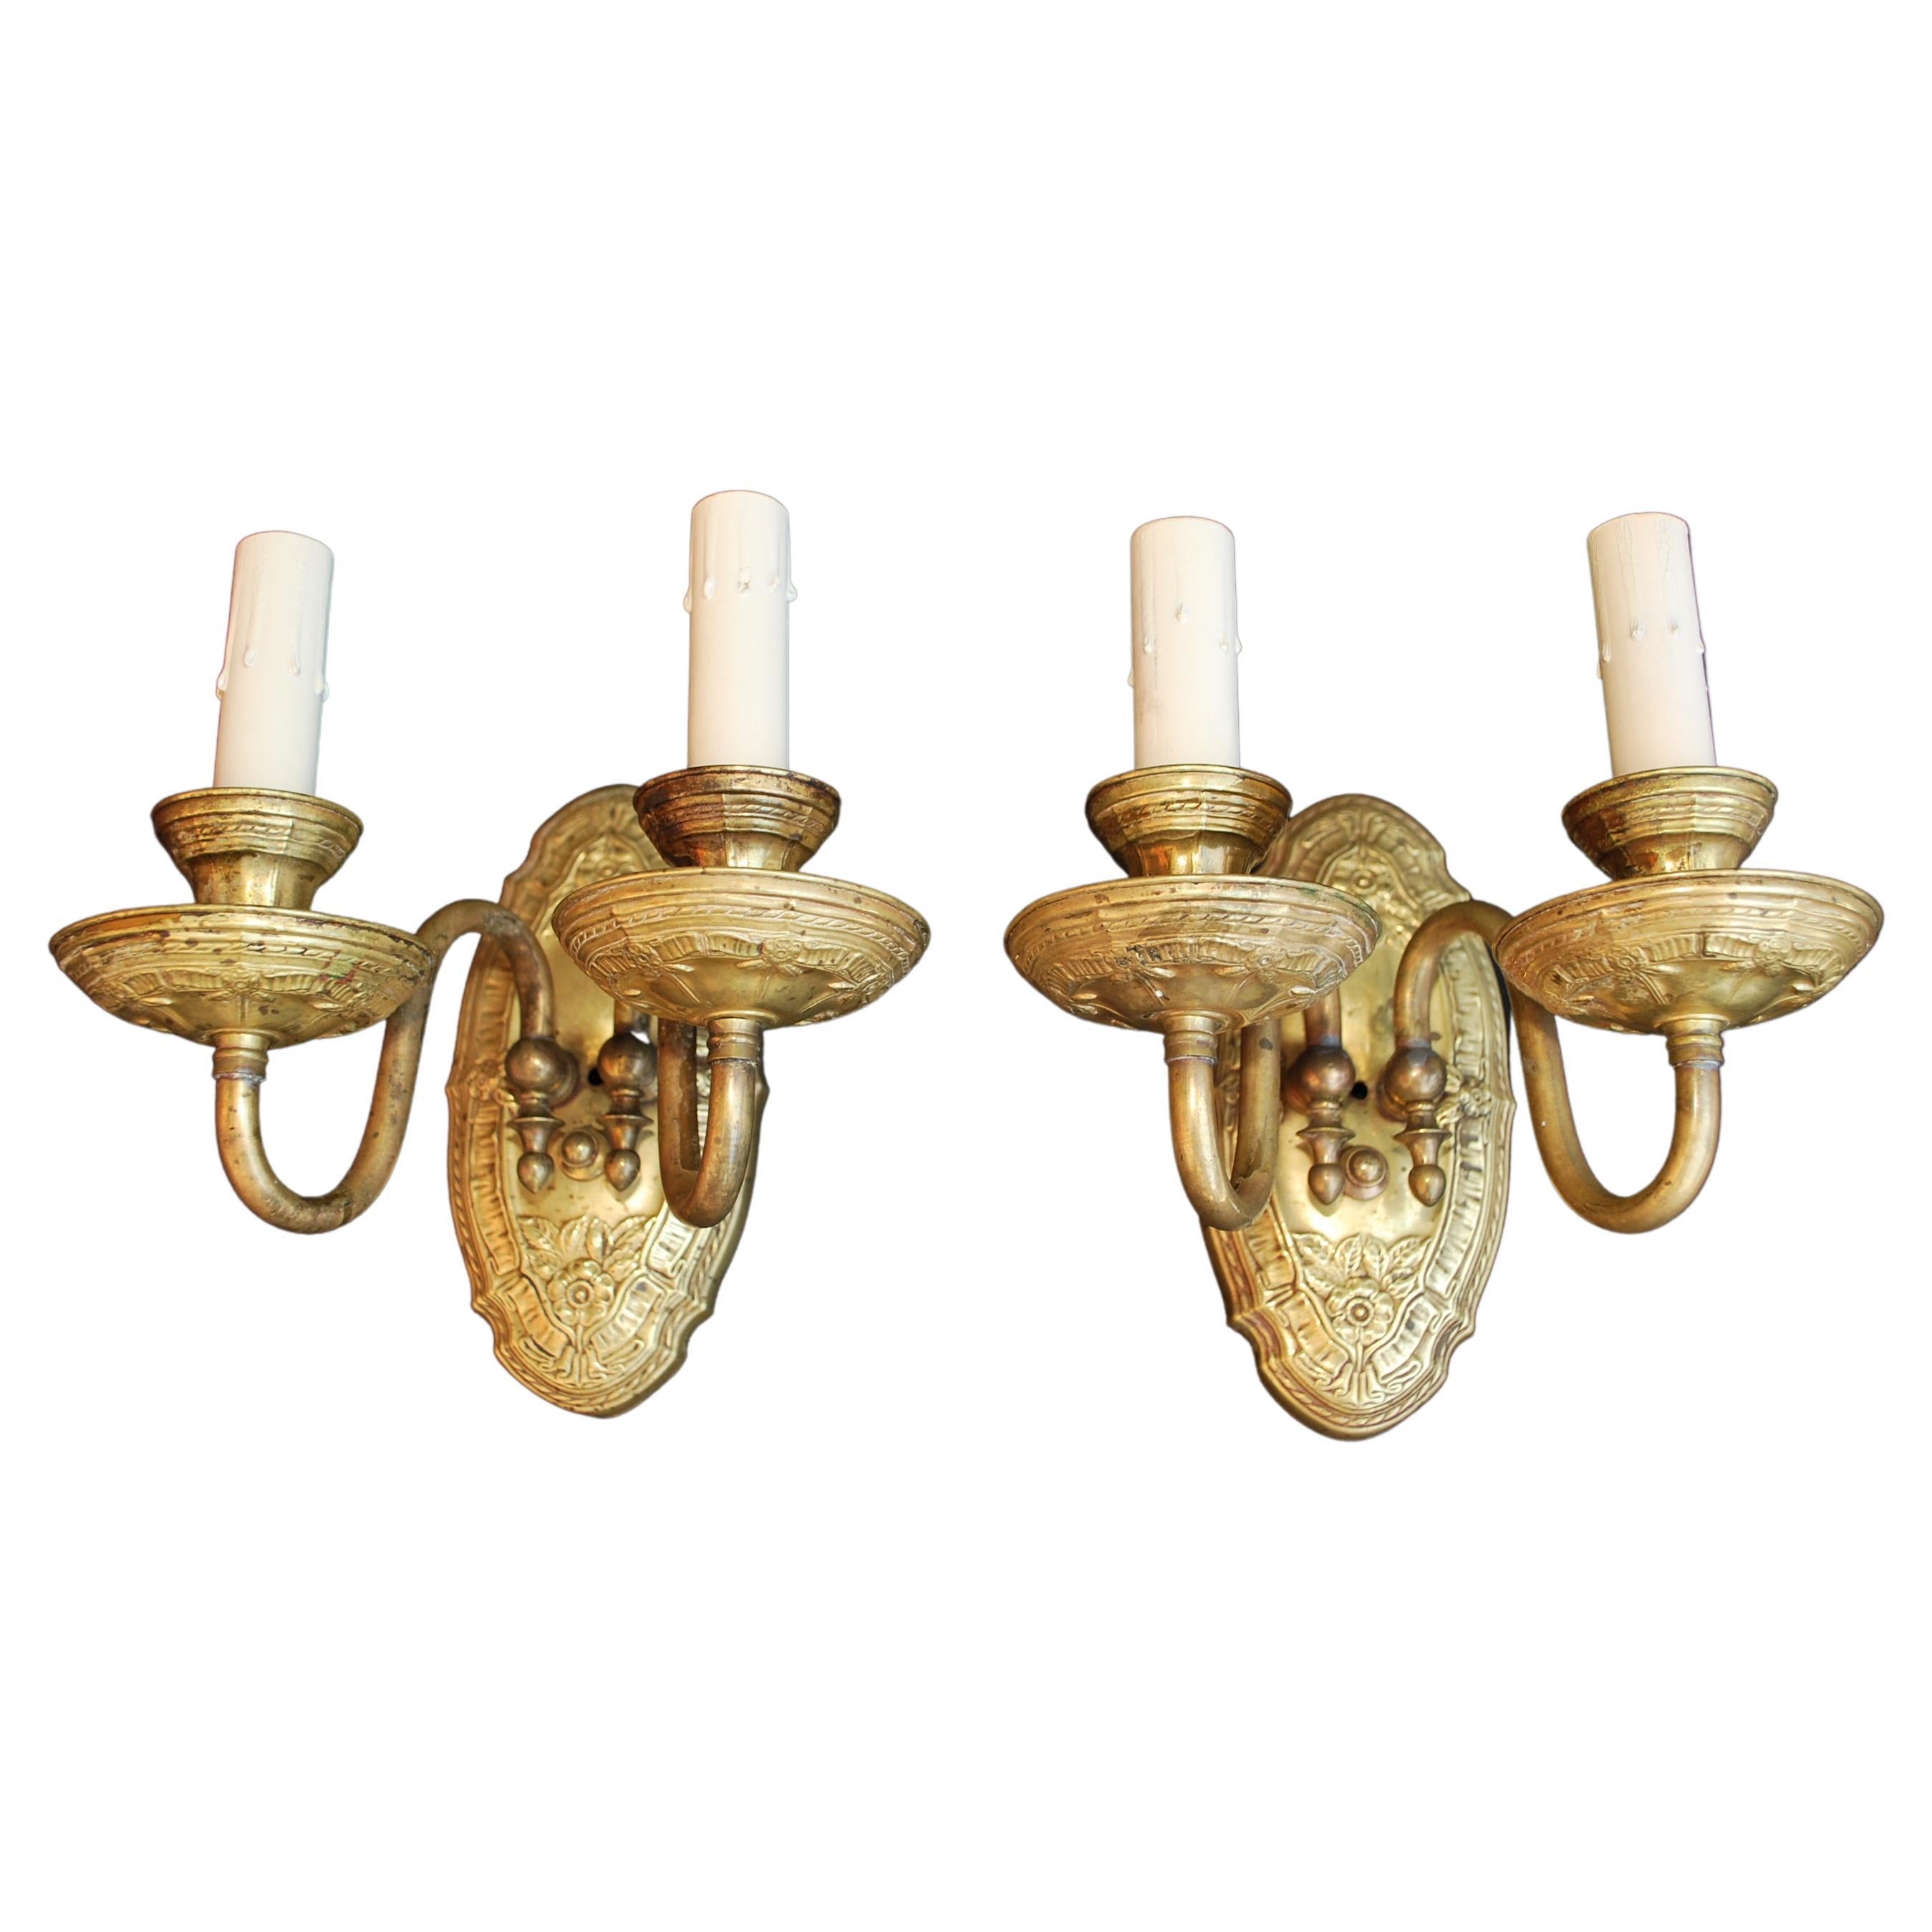 Beautiful Pair of 1920s Brass Sconces